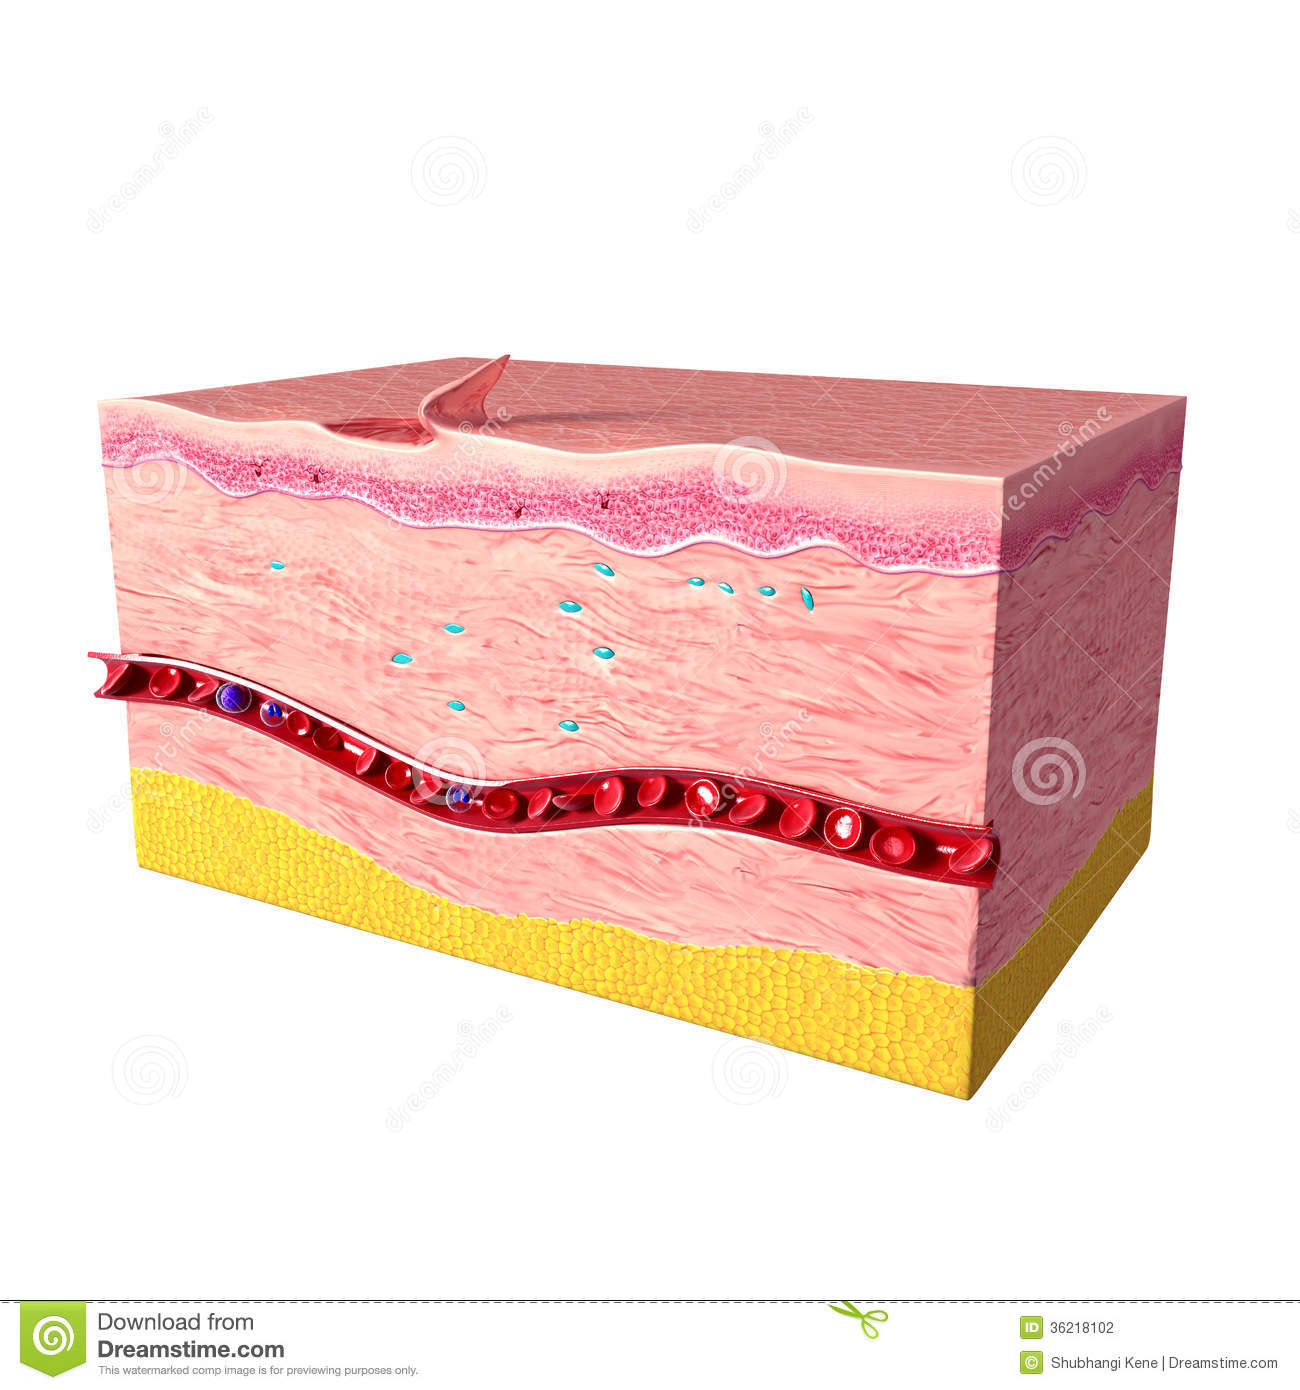 Anatomy Of Tissue Tepair In Human Skin Stock Photography   Image